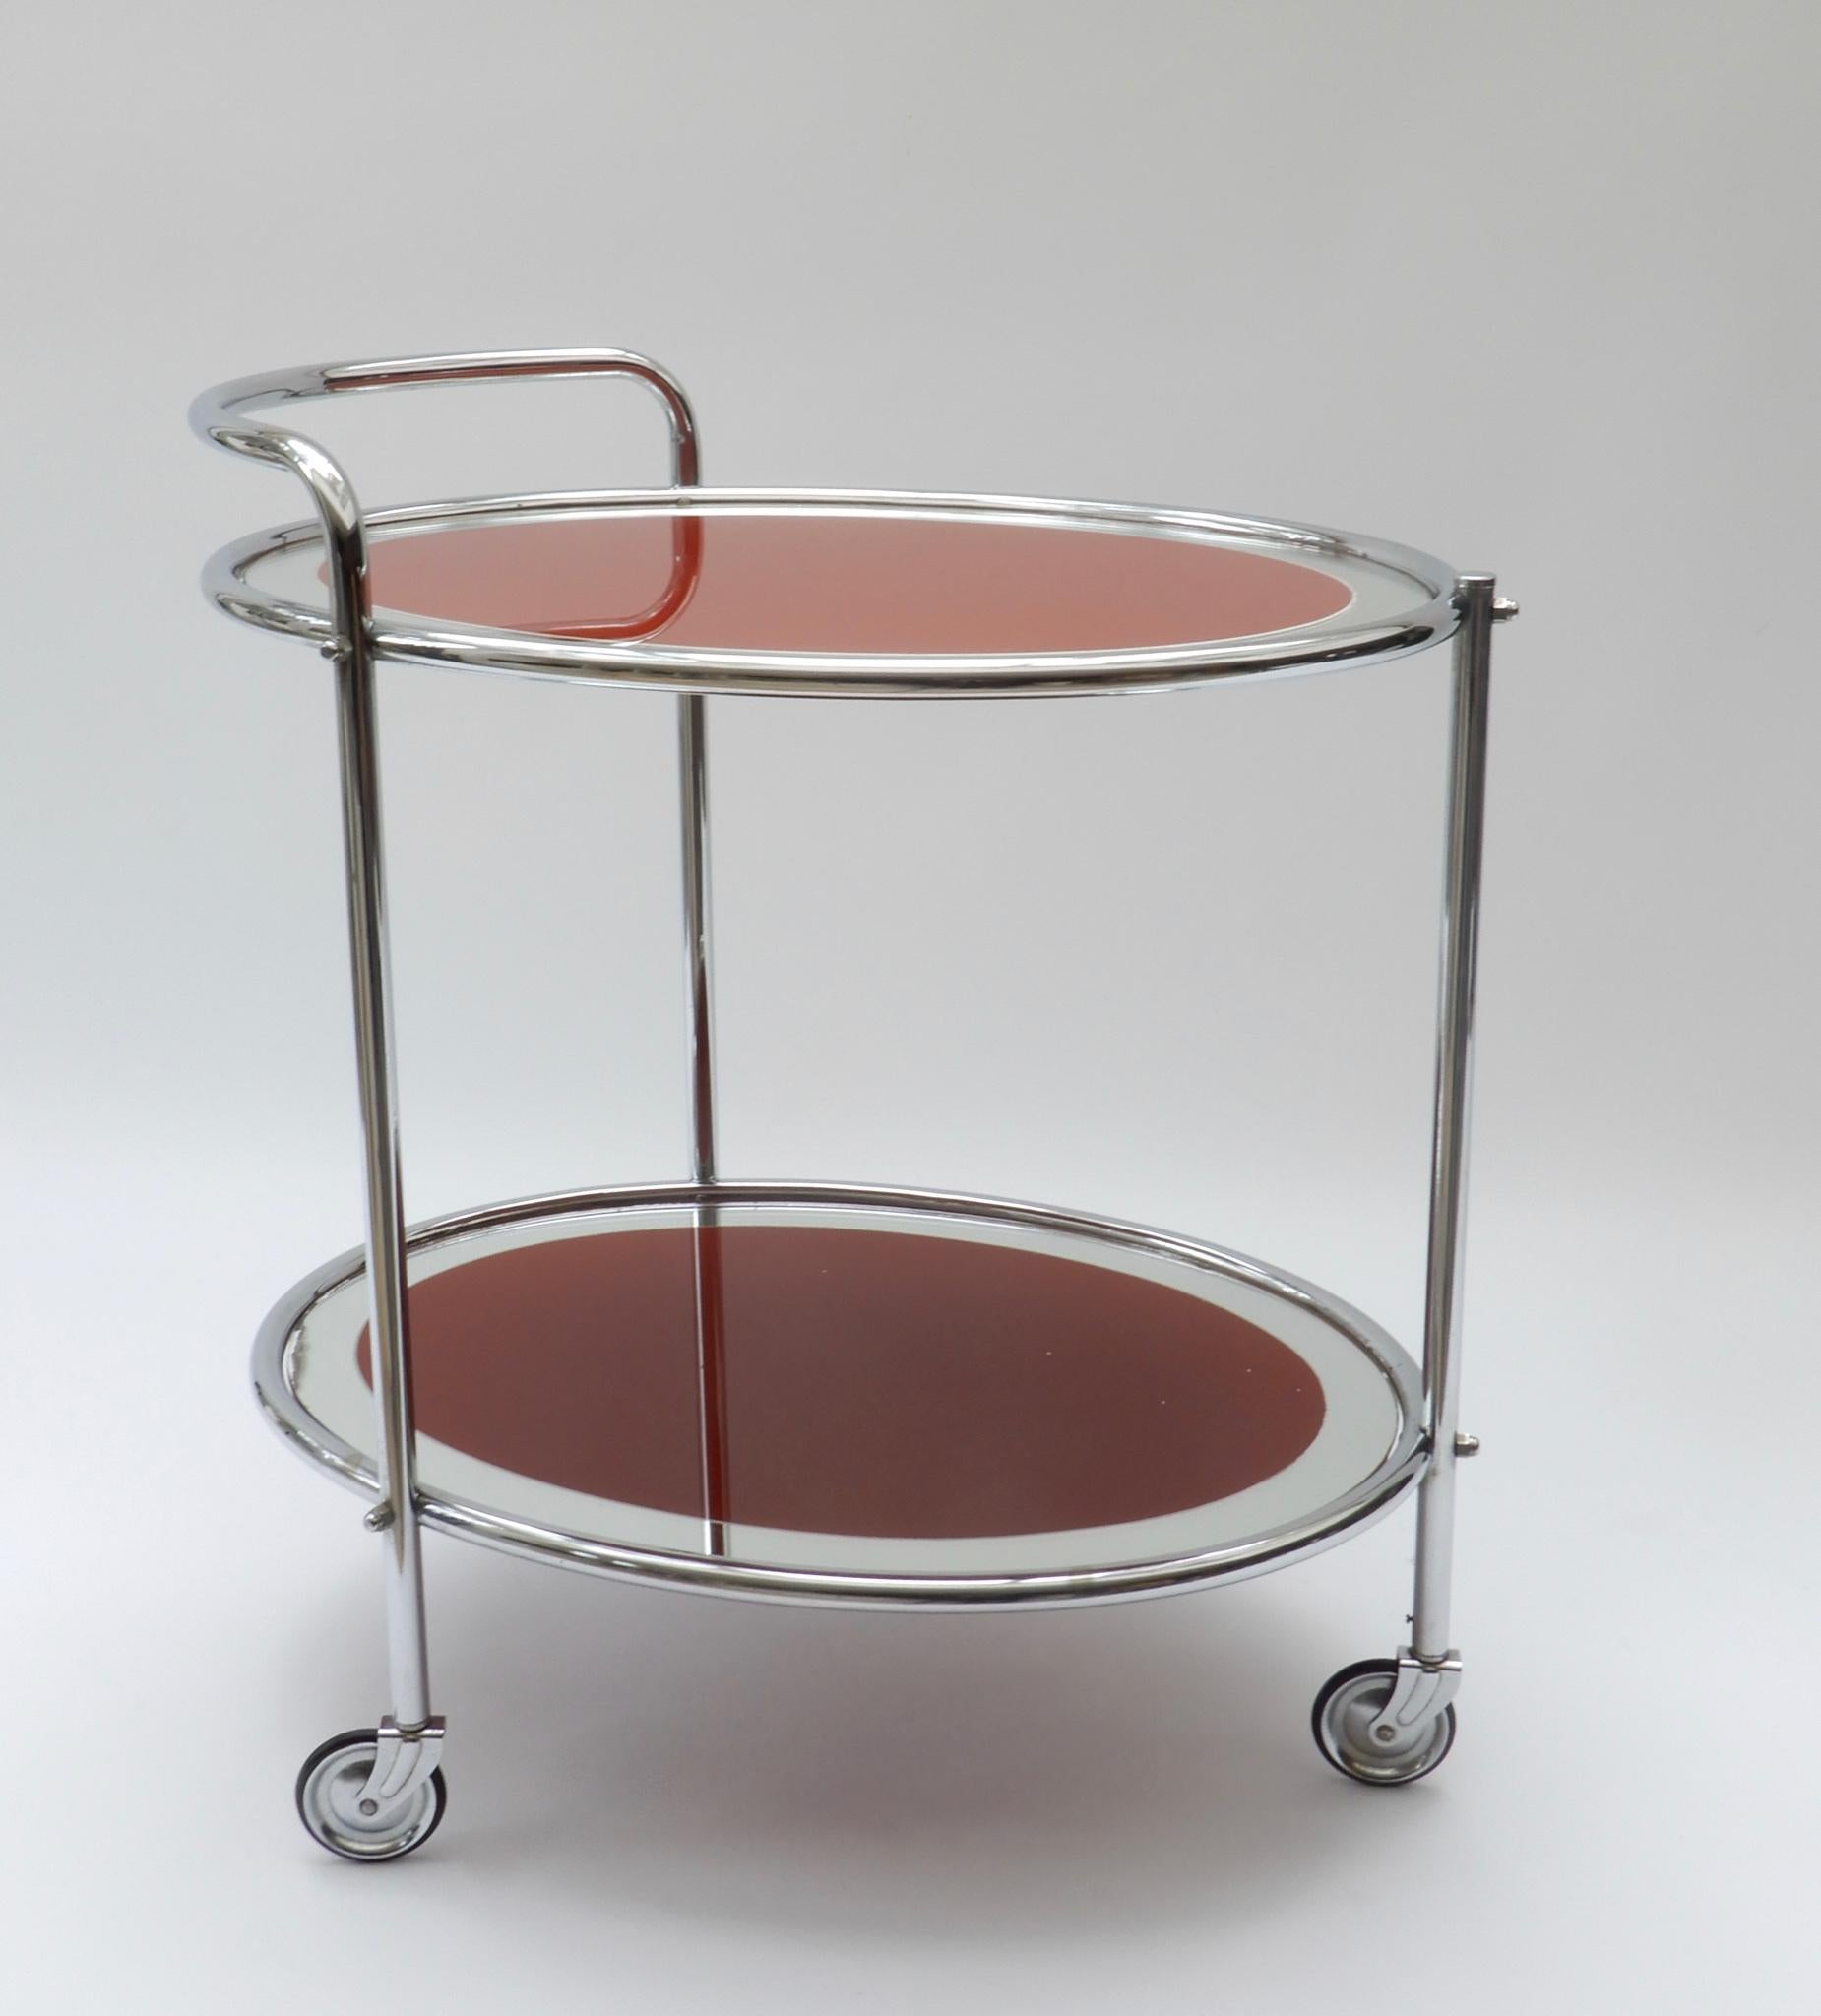 Oval Chrome and Rust Glass Mirrored Bar Cart, 1950s For Sale 5